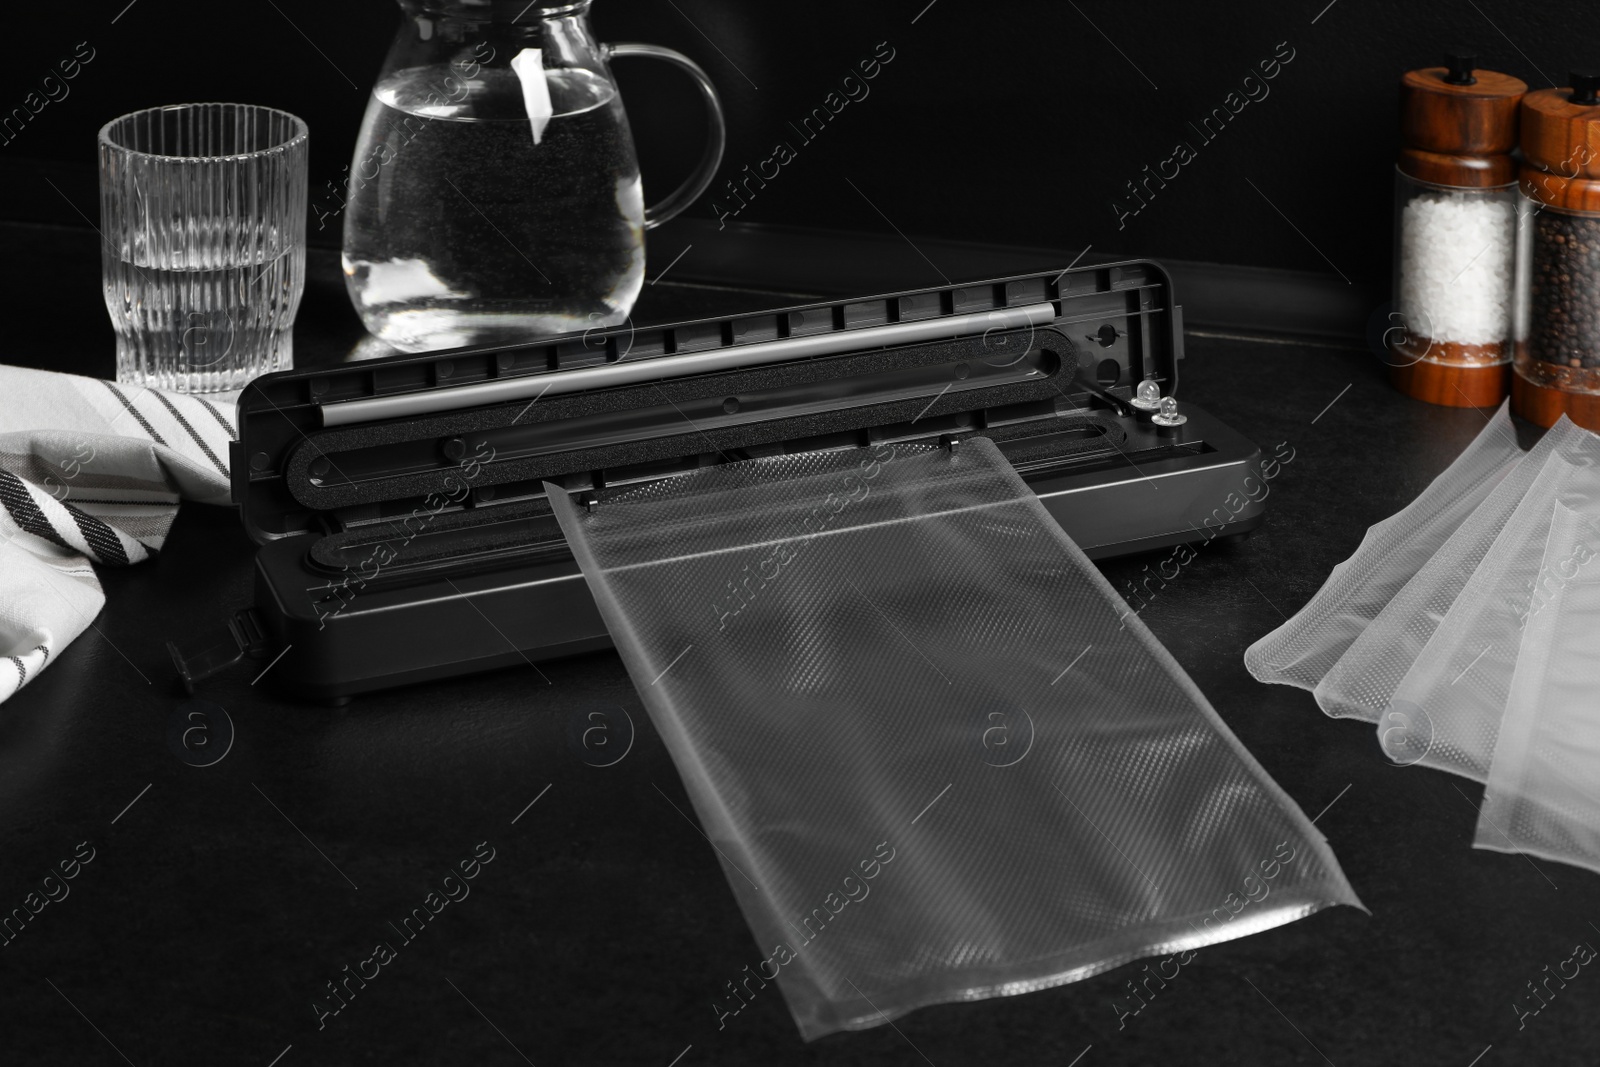 Photo of Sealer for vacuum packing with plastic bags on black kitchen countertop